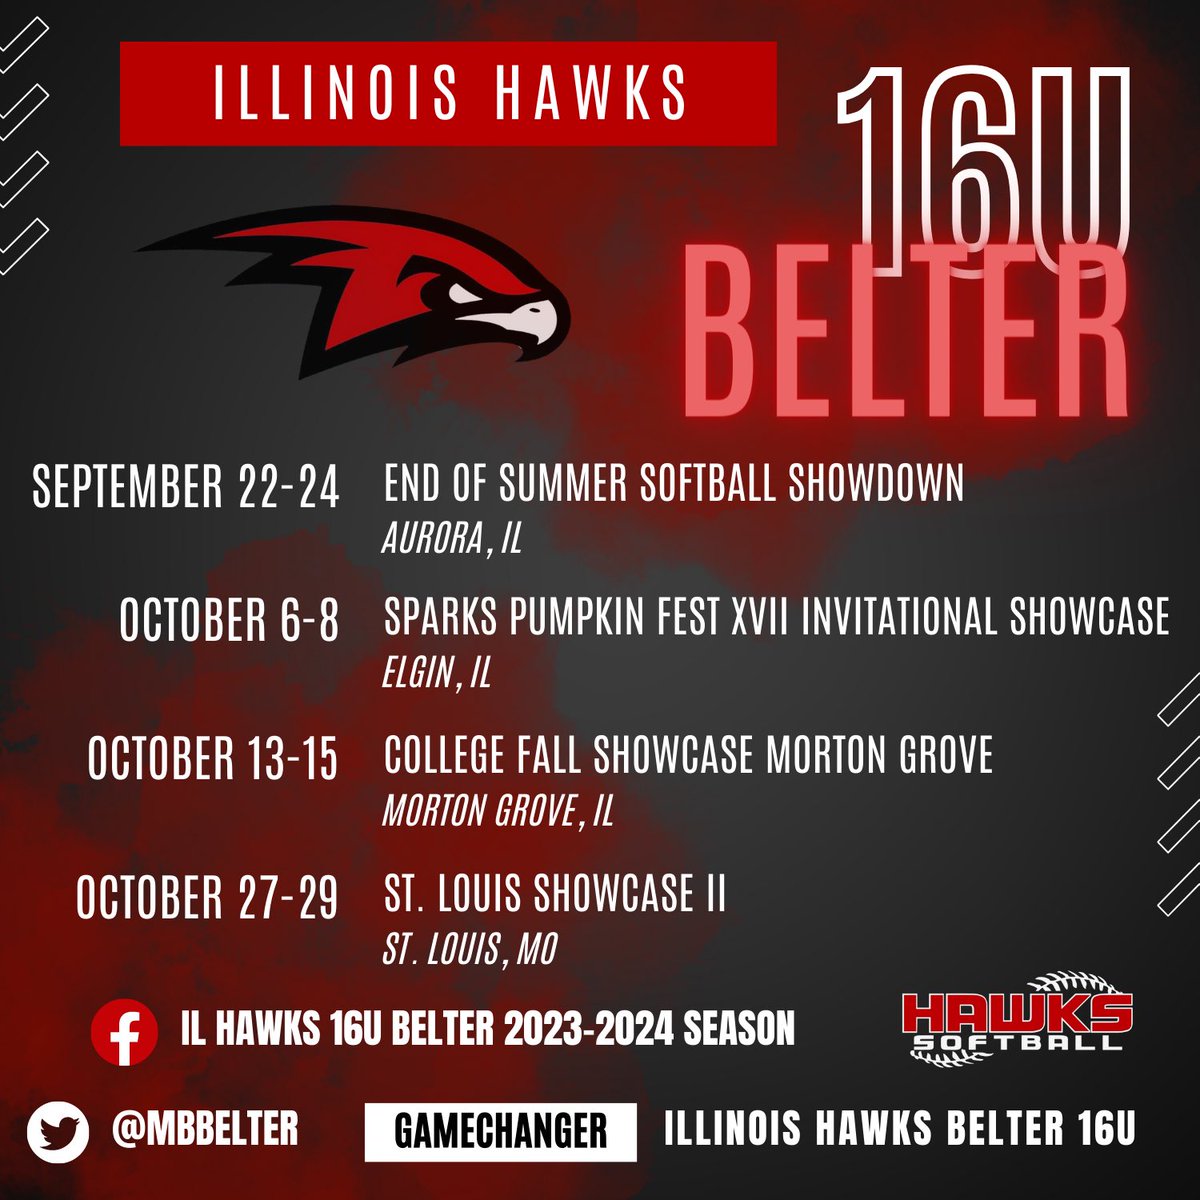 Released Hawks schedule below! Round robins and friendly’s in the mix as well. These ladies will make big moves this season and onward! Can not wait to see it on the field🔥🥎